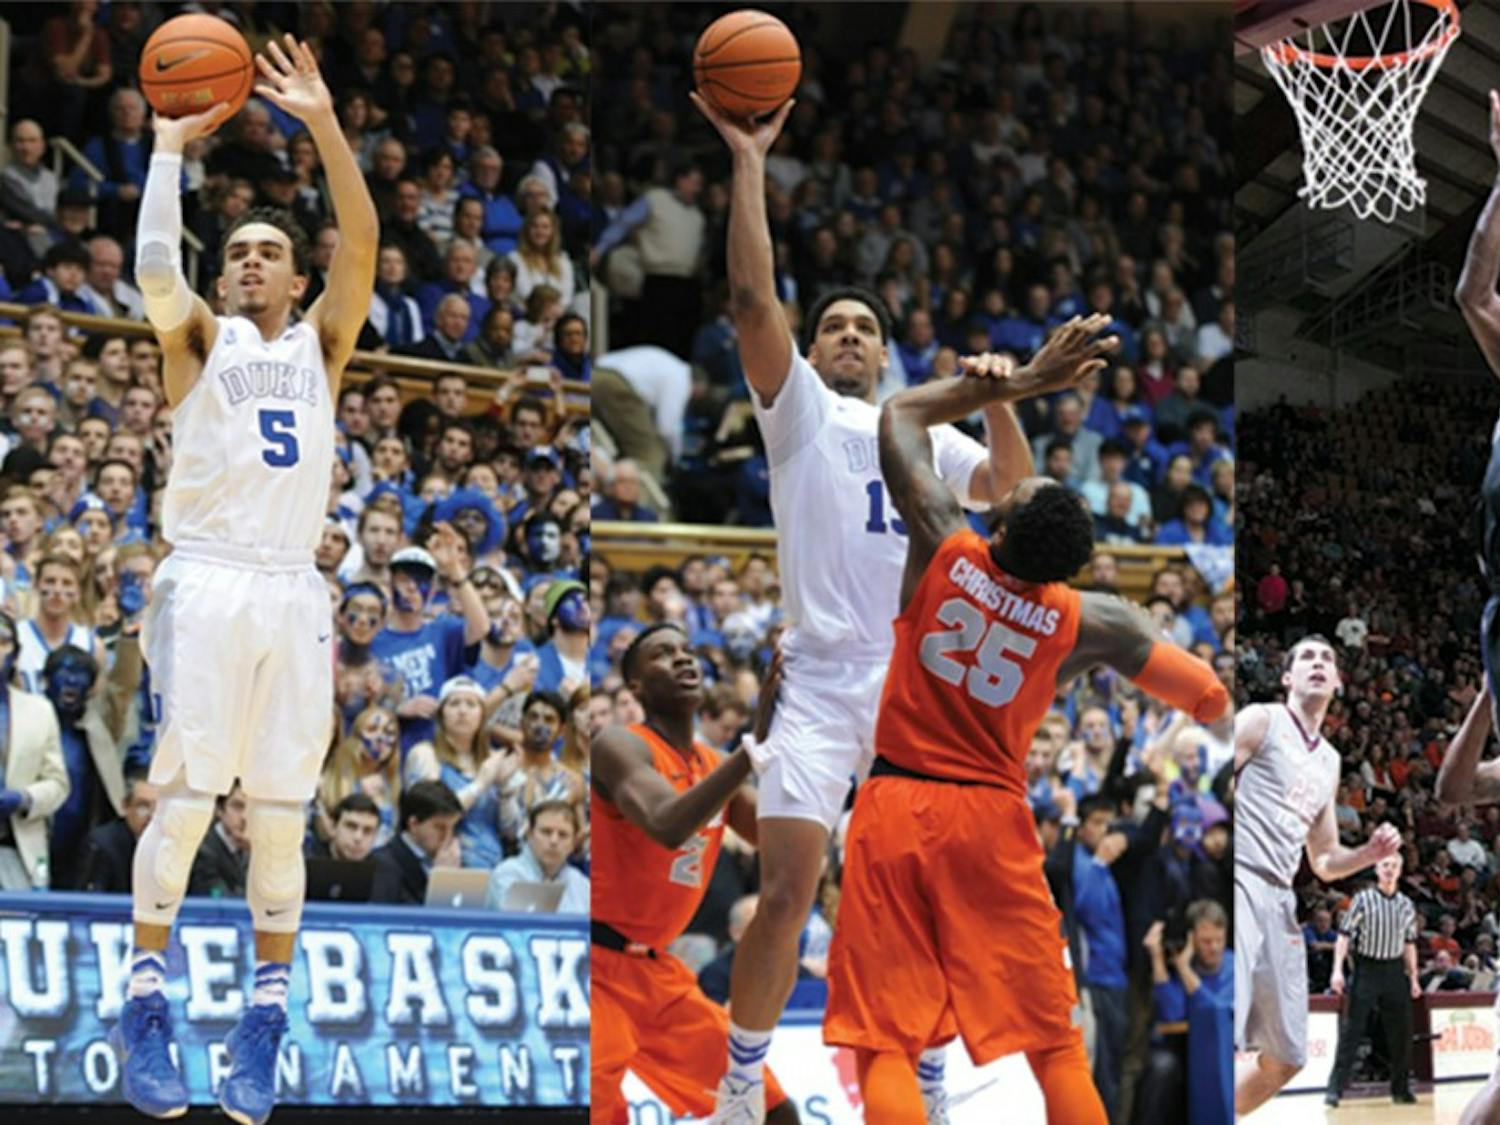 Freshmen Tyus Jones, Jahlil Okafor and Justise Winslow have been a big reason for Duke's success this season.